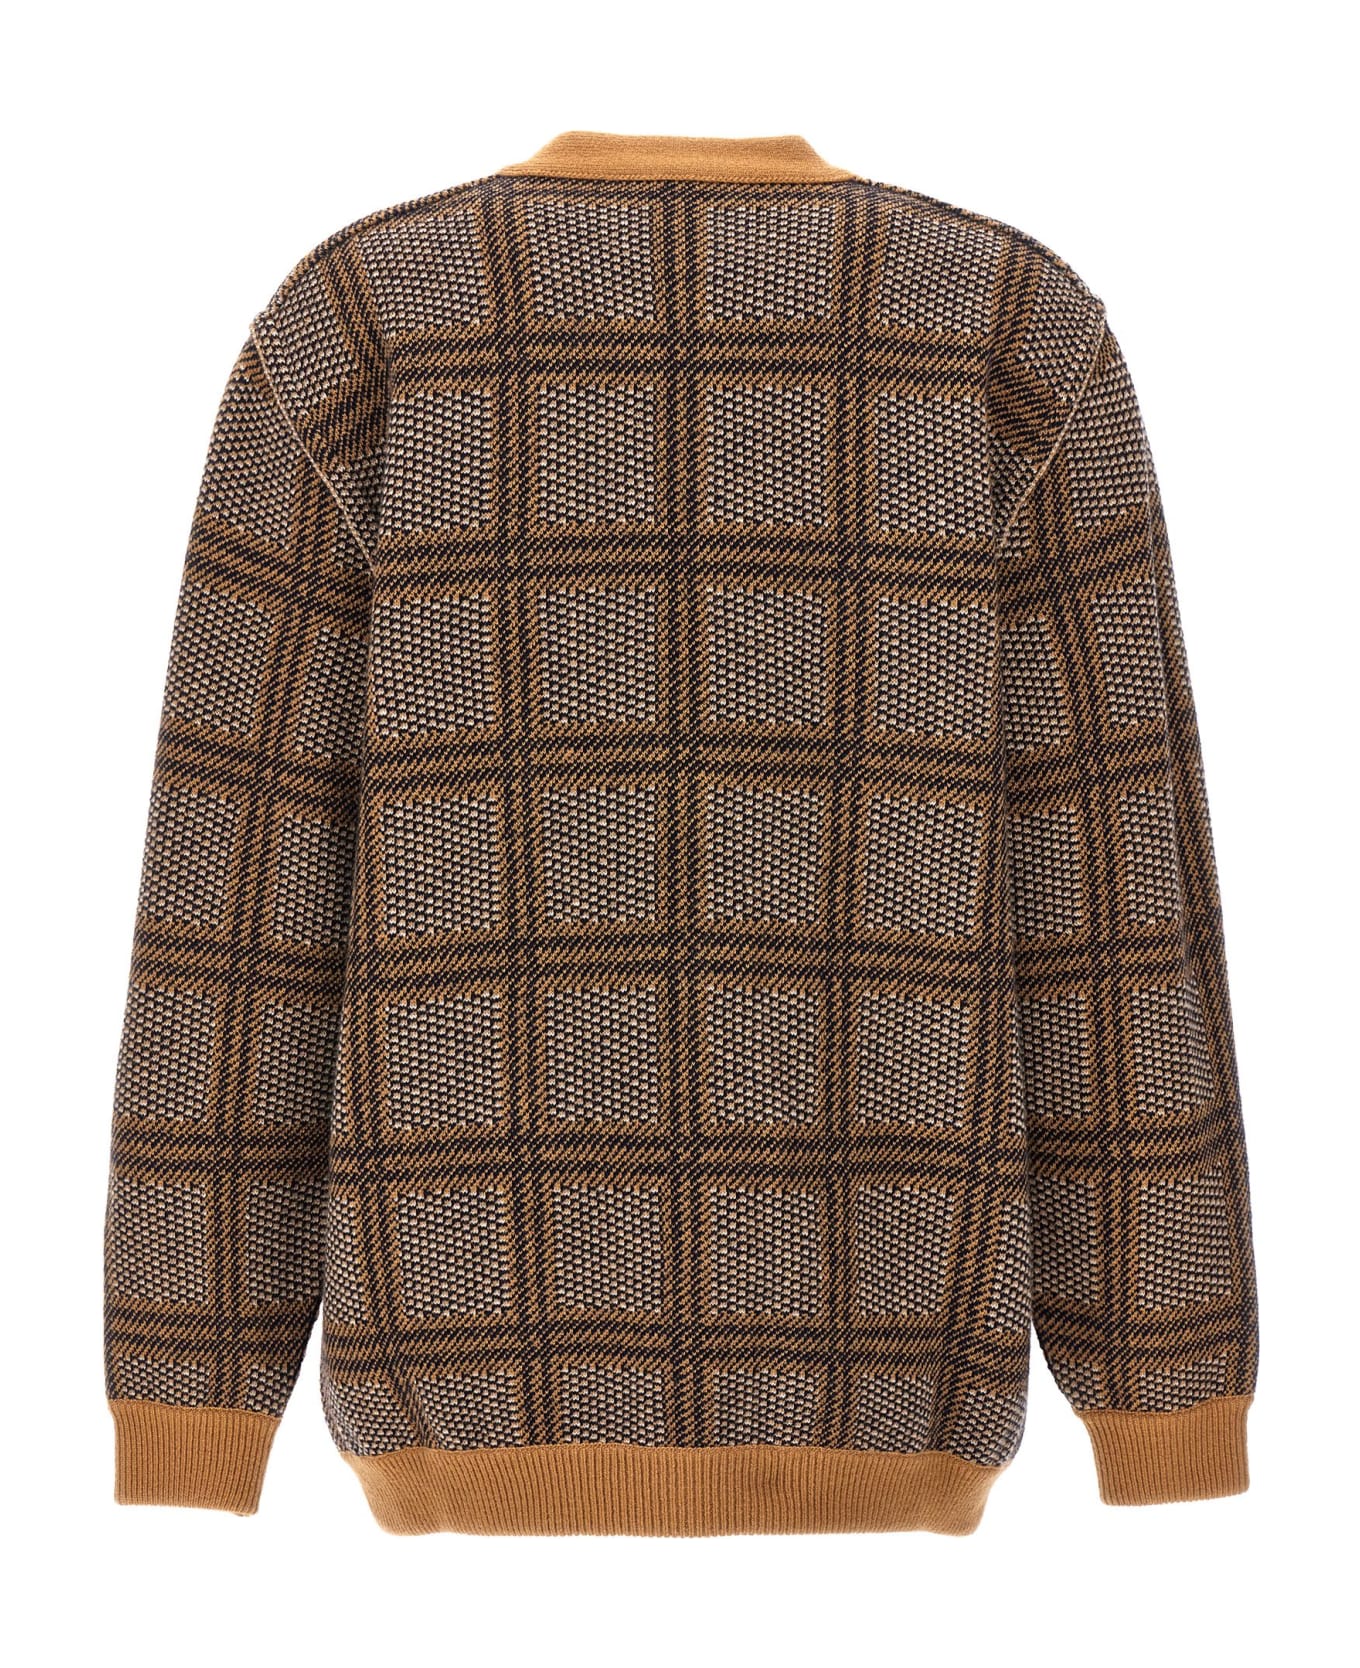 Gucci Check And 'gg' Reversible Cardigan - Beige